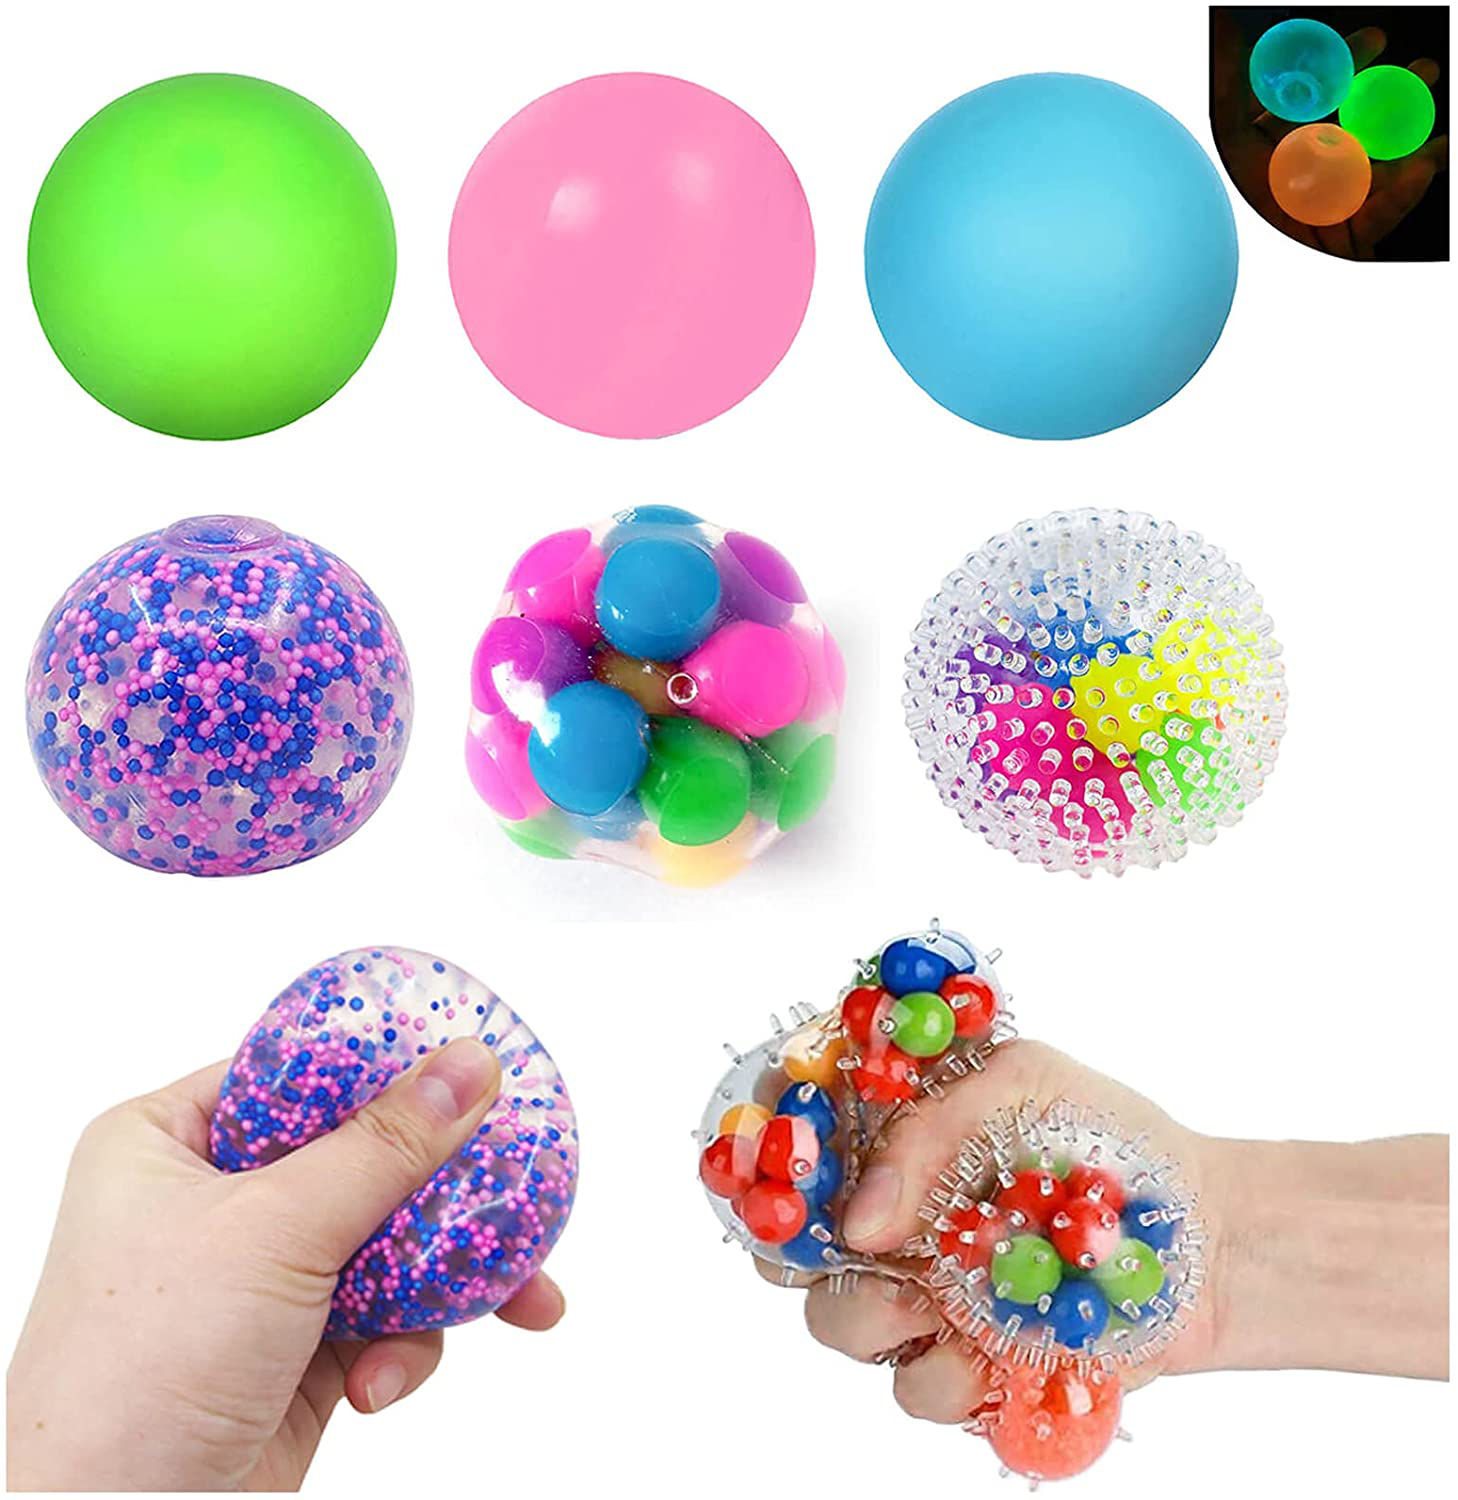 OCD Anxiety Sensory Stress Ball Toy Squeeze Ball Decompress Stress Relief Balls DNA Color Birthday Gift Stress Relief Exercise Hand Ball for Kids Adults ADHD 